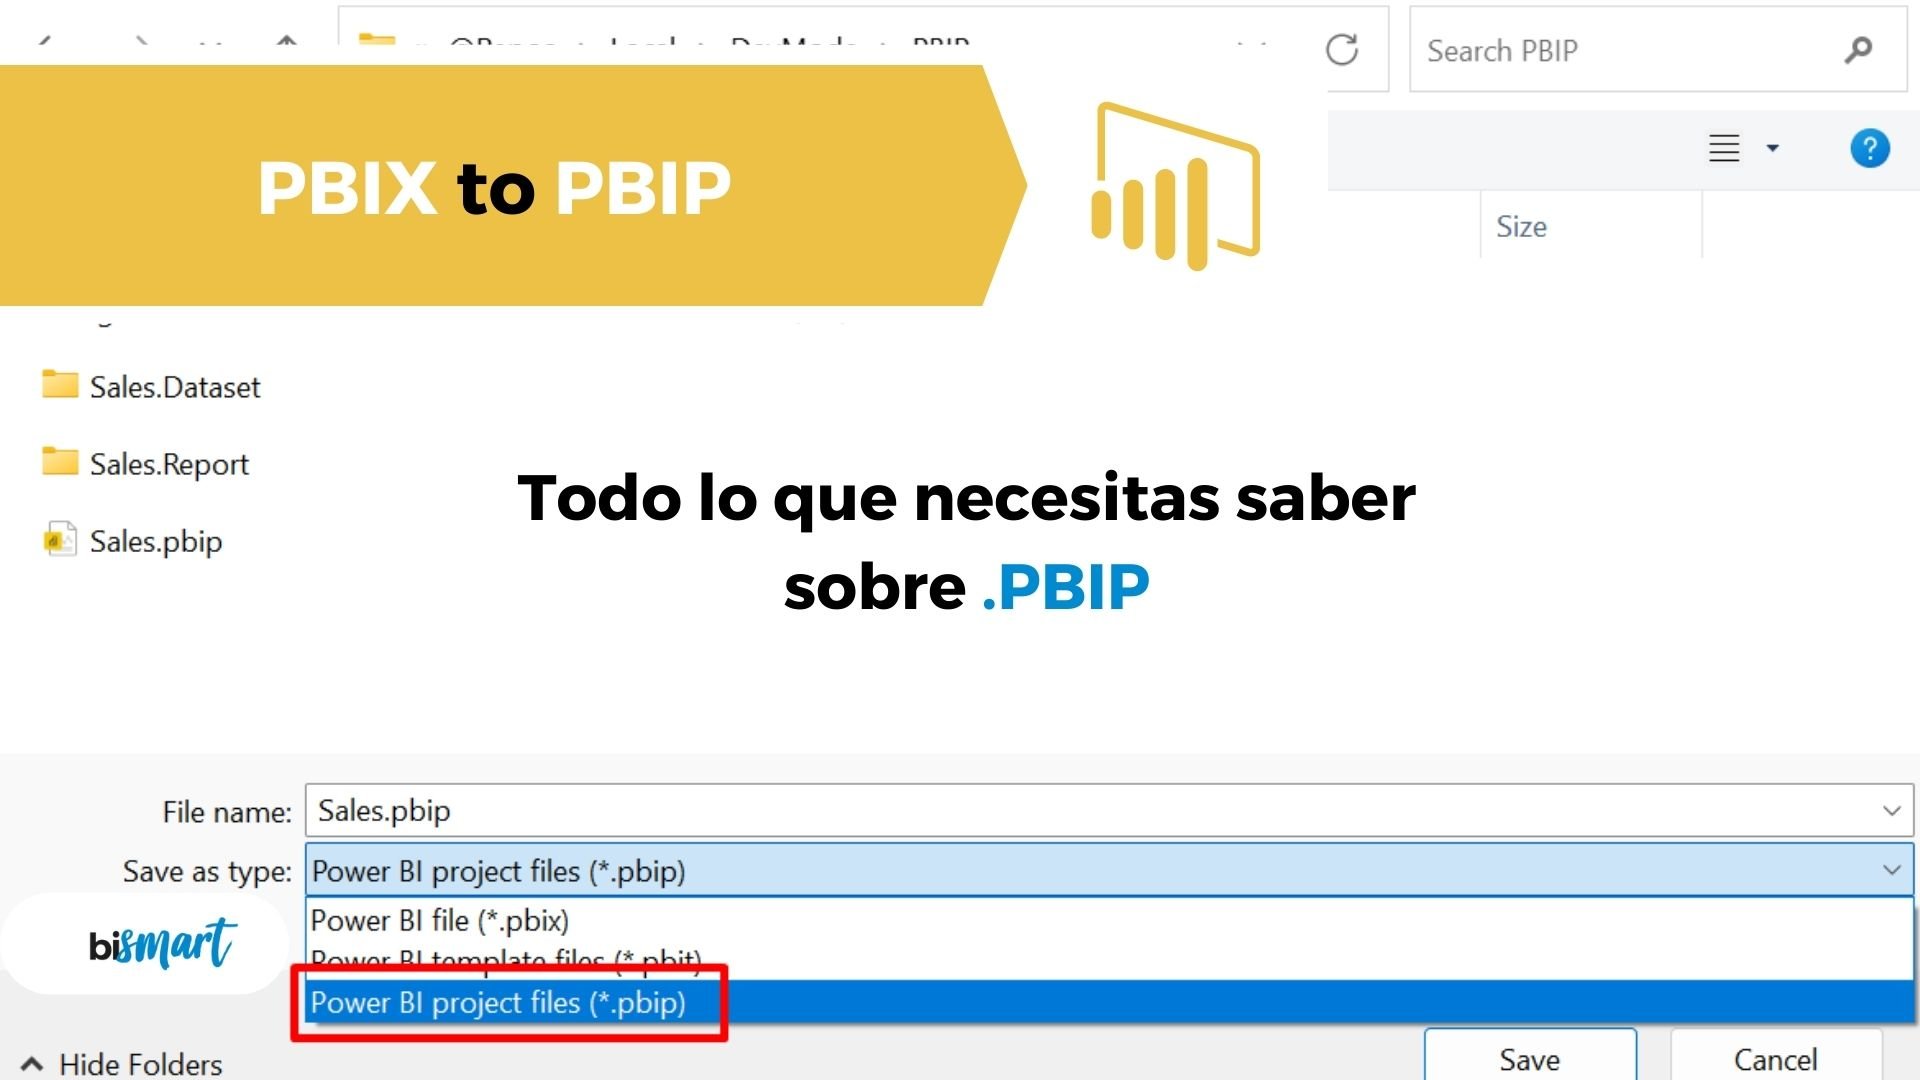 What Is a .PBIP File in Power BI and How to Convert PBIX to PBIP?